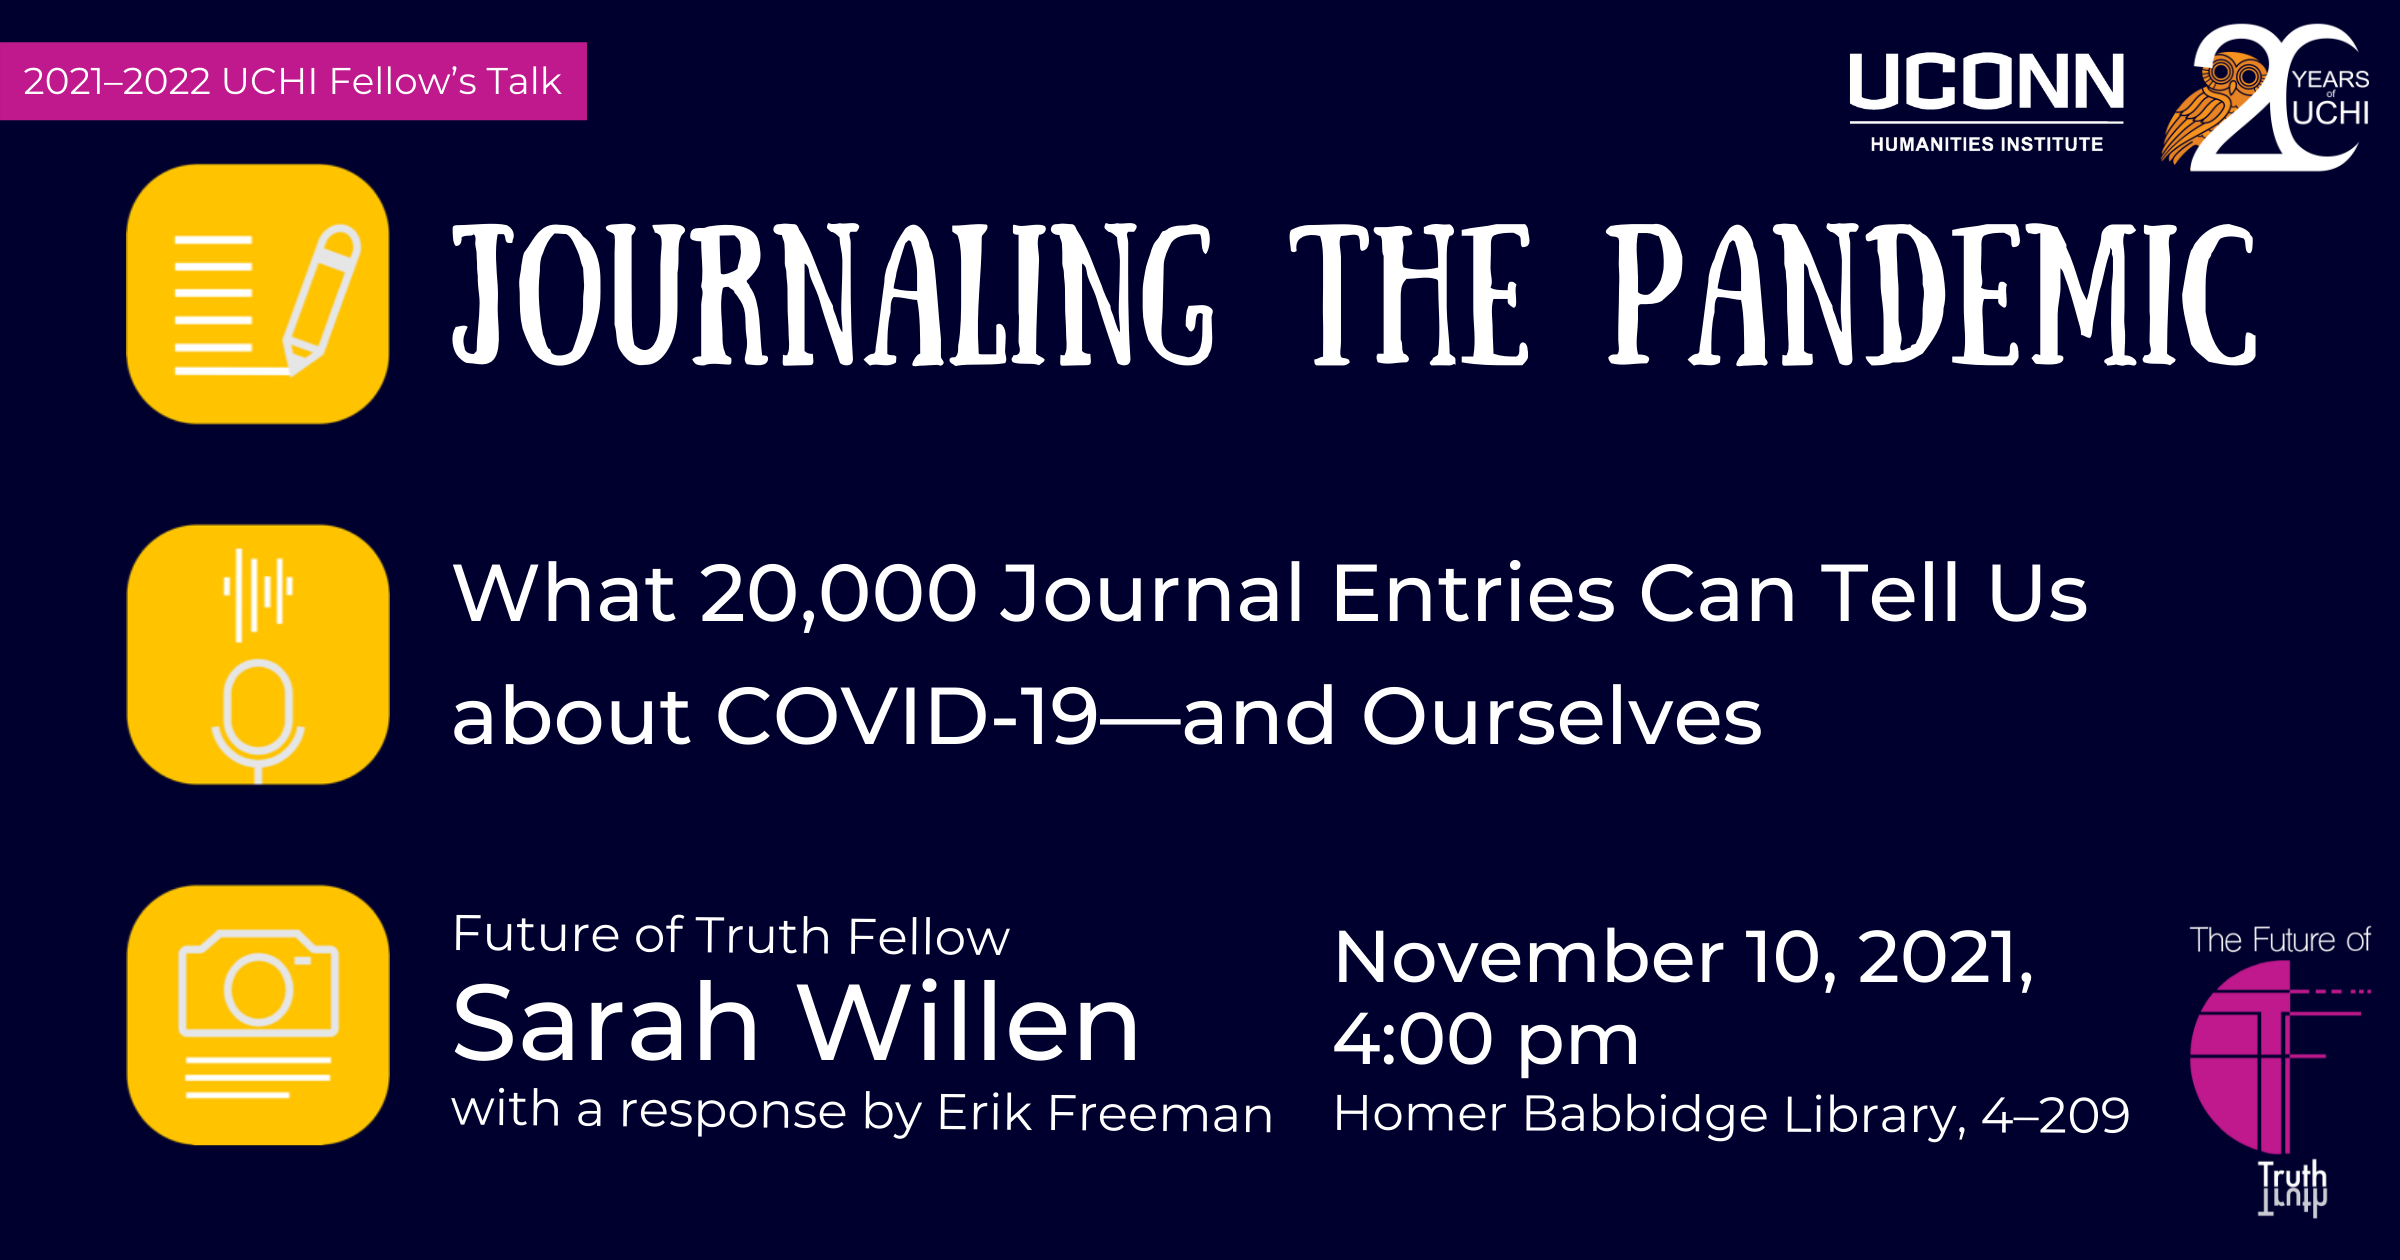 “Journaling the Pandemic: What 20,000 Journal Entries Can Tell Us About COVID-19—and Ourselves.” Future of Truth Fellow Sarah Willen, with a response by Erik Freeman. November 10, 2021, 4:00pm. Homer Babbidge Library, 4-209.